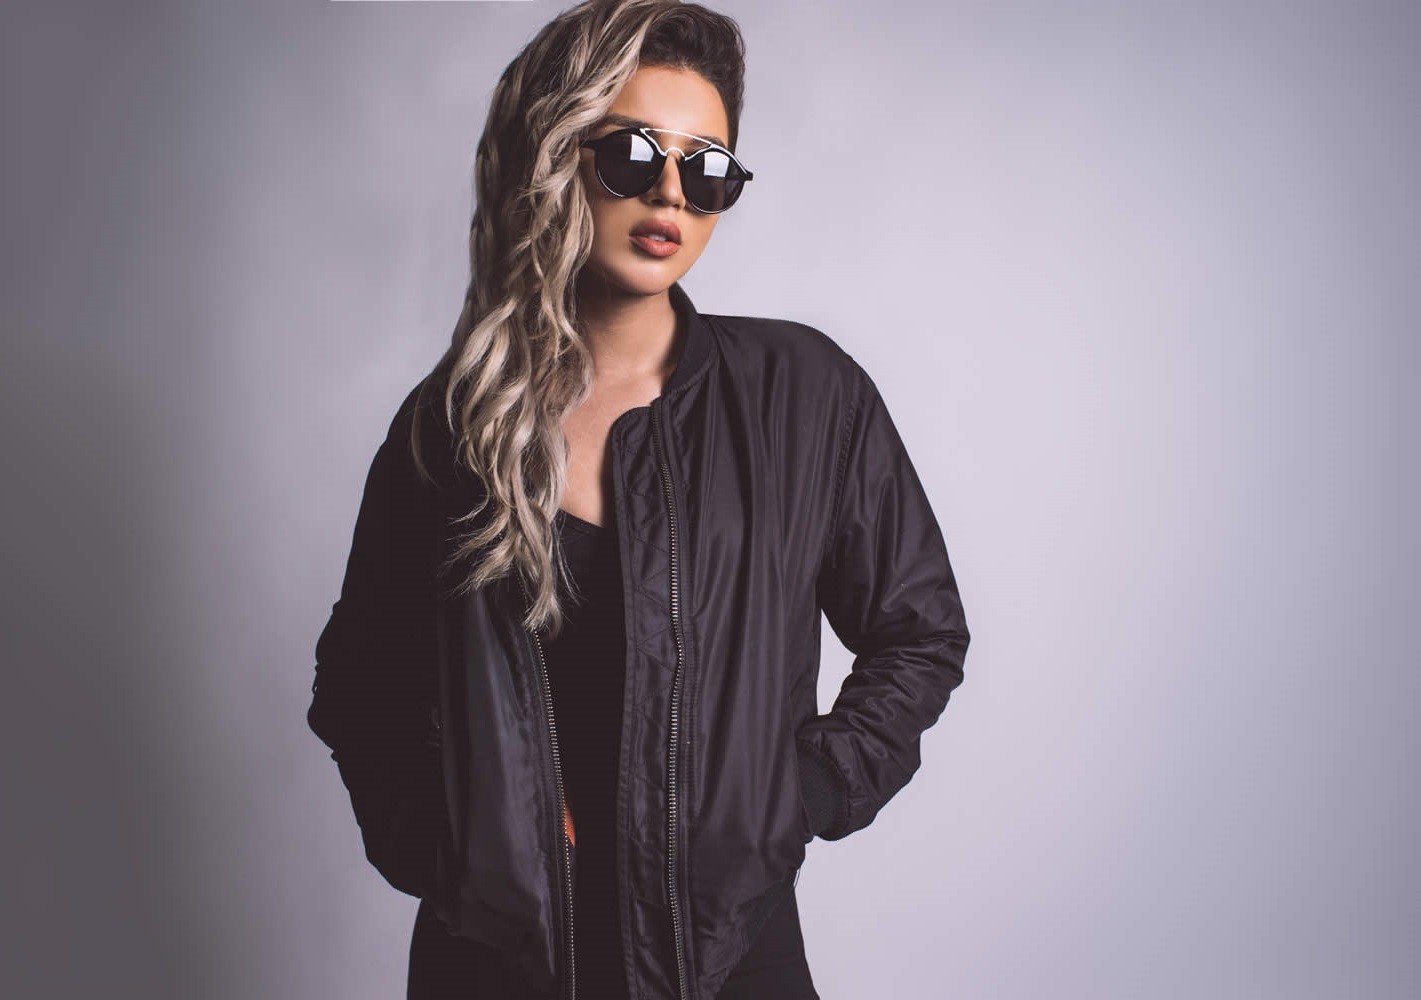 People 1421x1000 sunglasses women women with shades blonde simple background women indoors indoors studio red lipstick black clothing gray background model long hair dyed hair